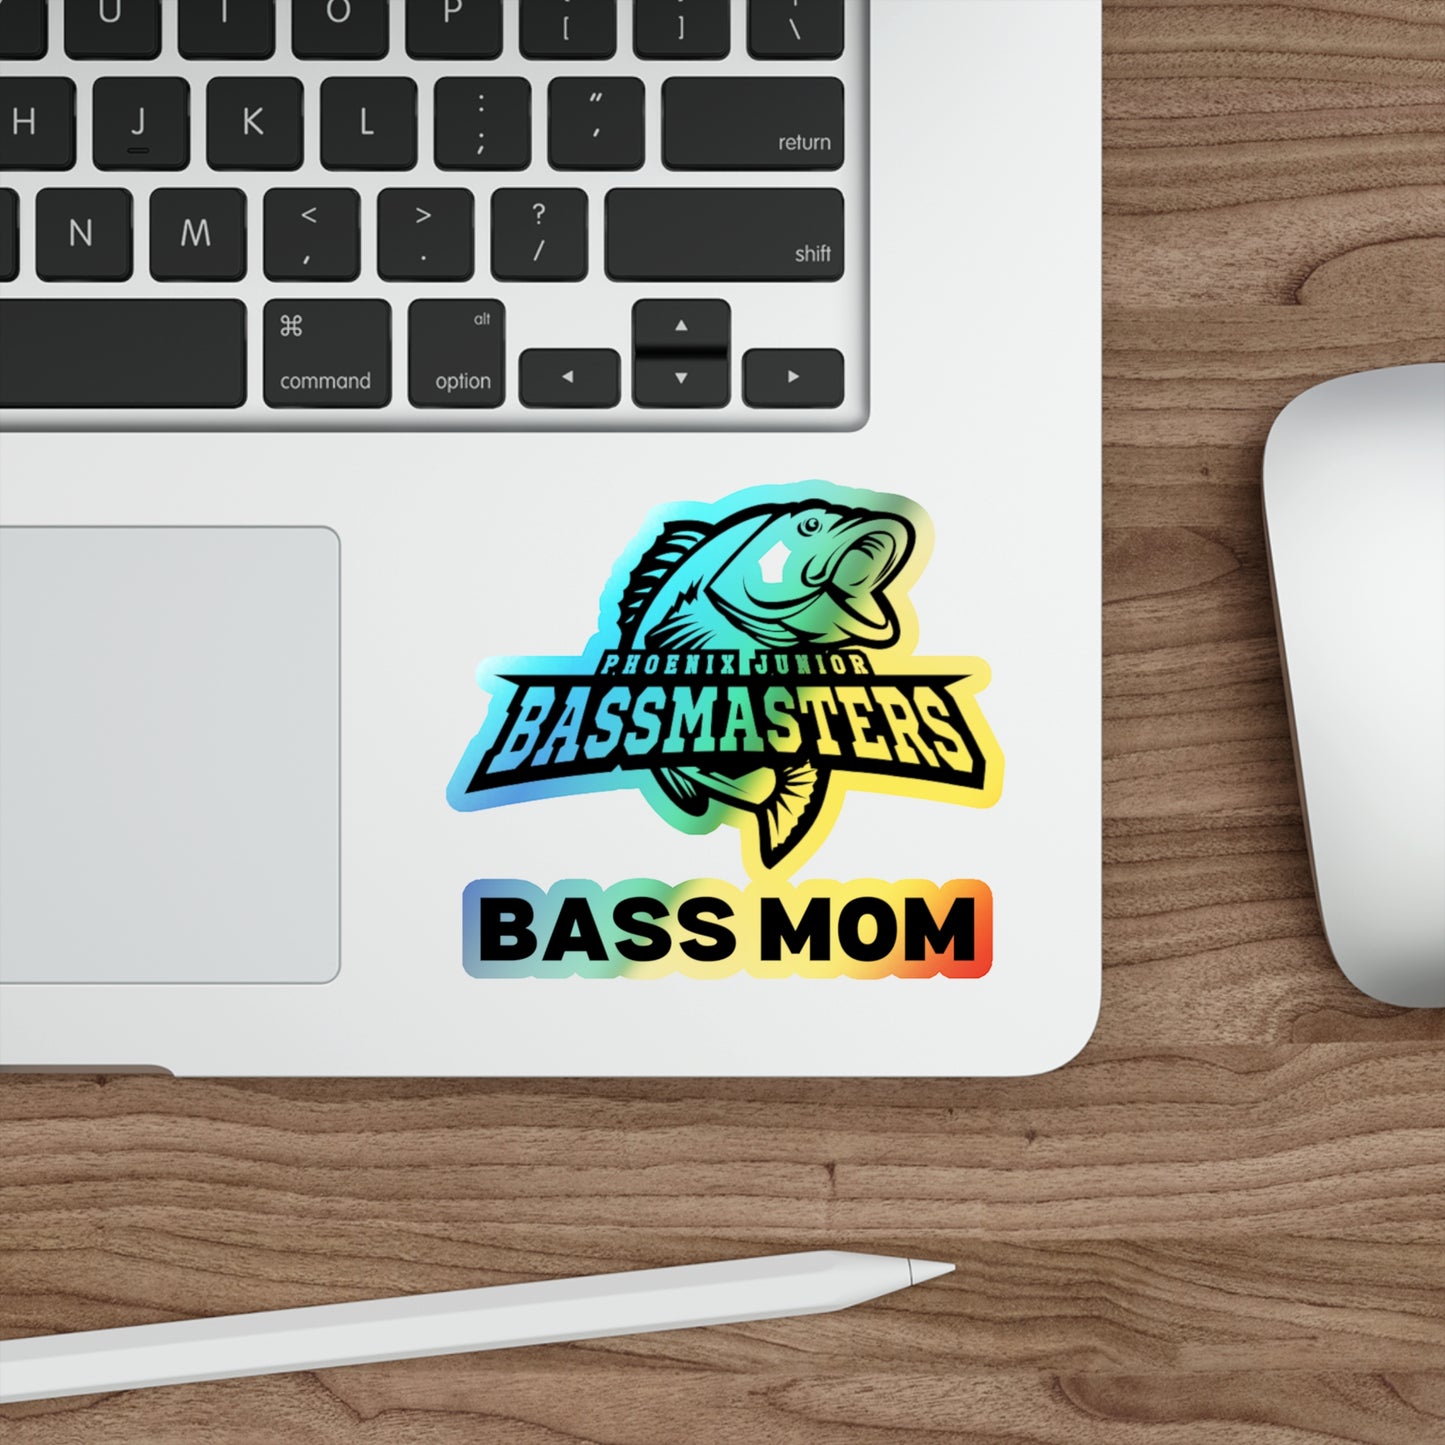 Holographic Die-cut Stickers - Junior Bassmasters - BASS MOM